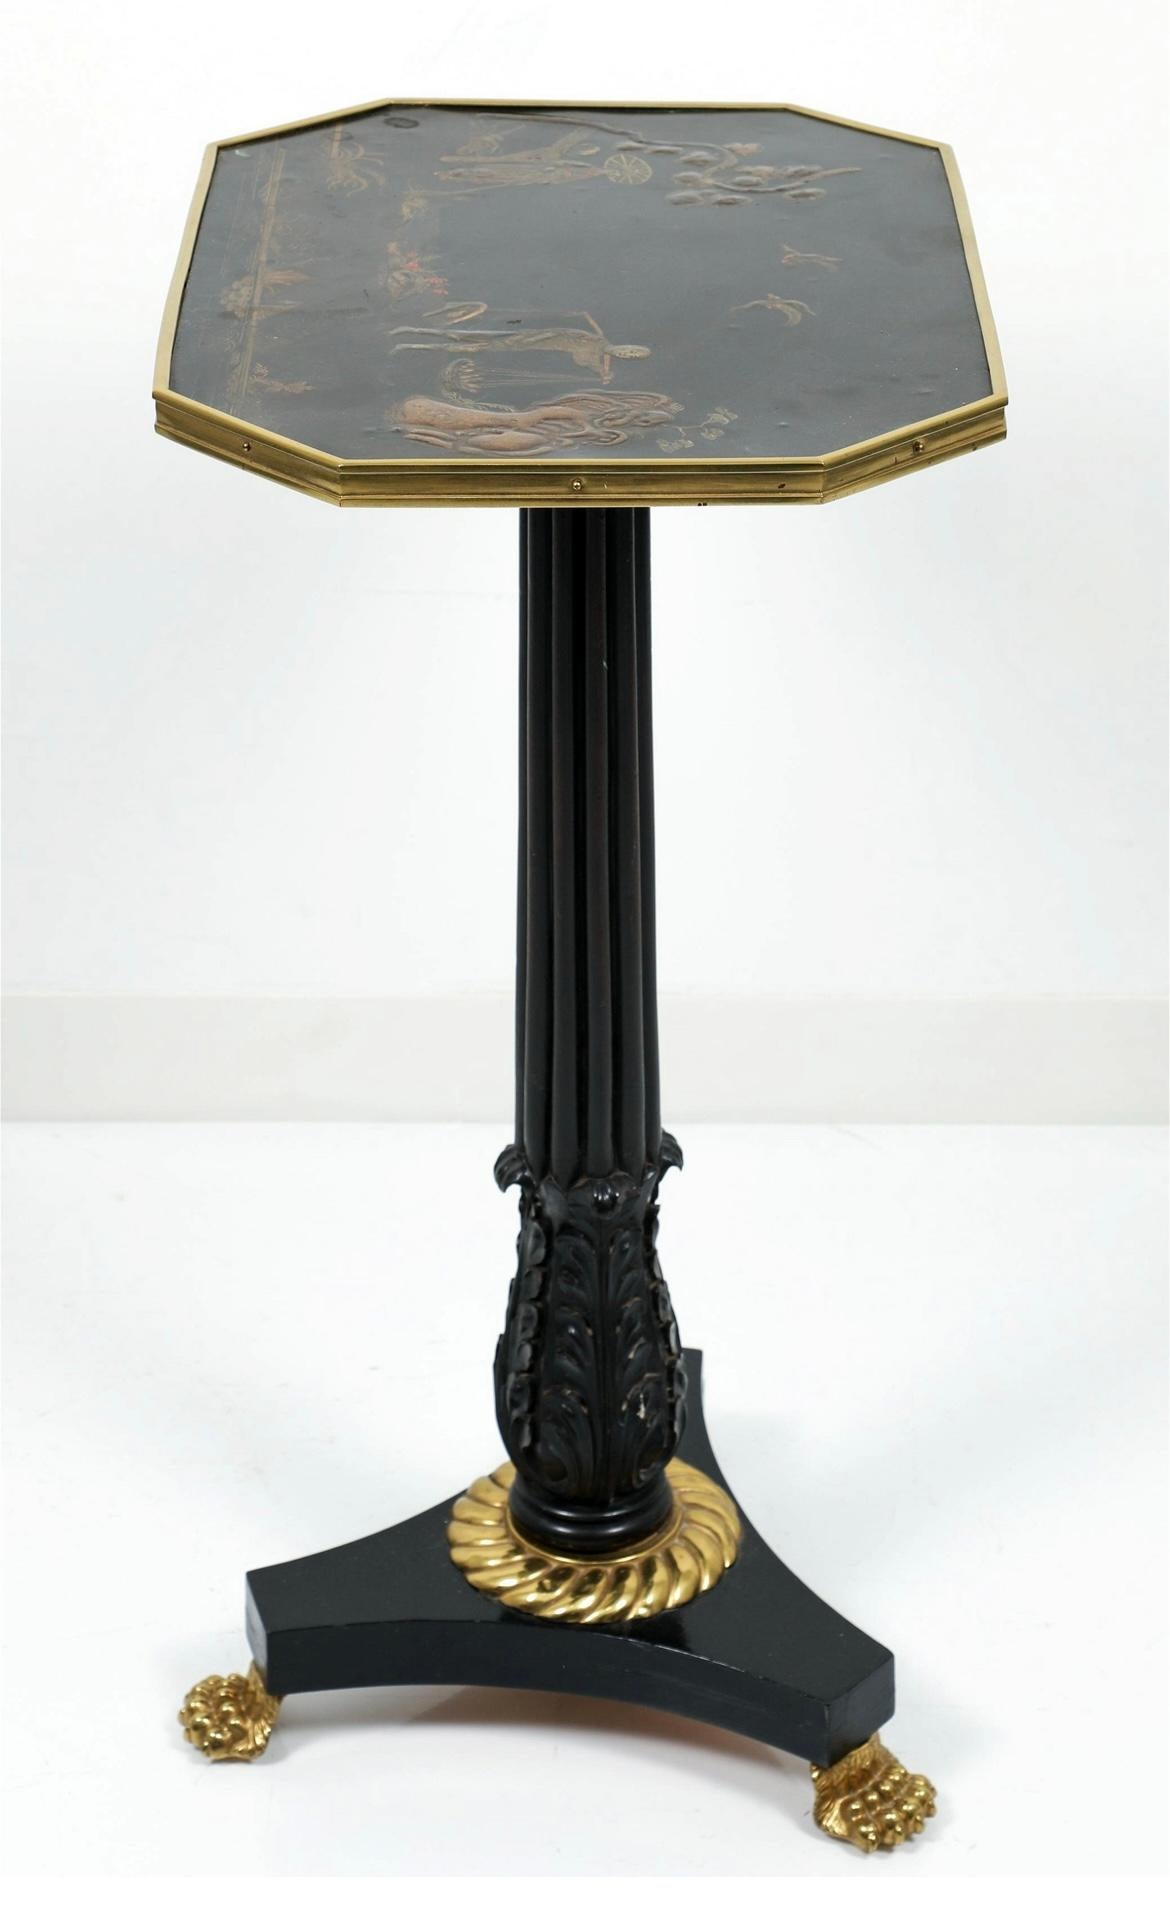 English Regency Chinoiserie Lacquer Top Ebonized Brass Mounted Stand, circa 1820 For Sale 8